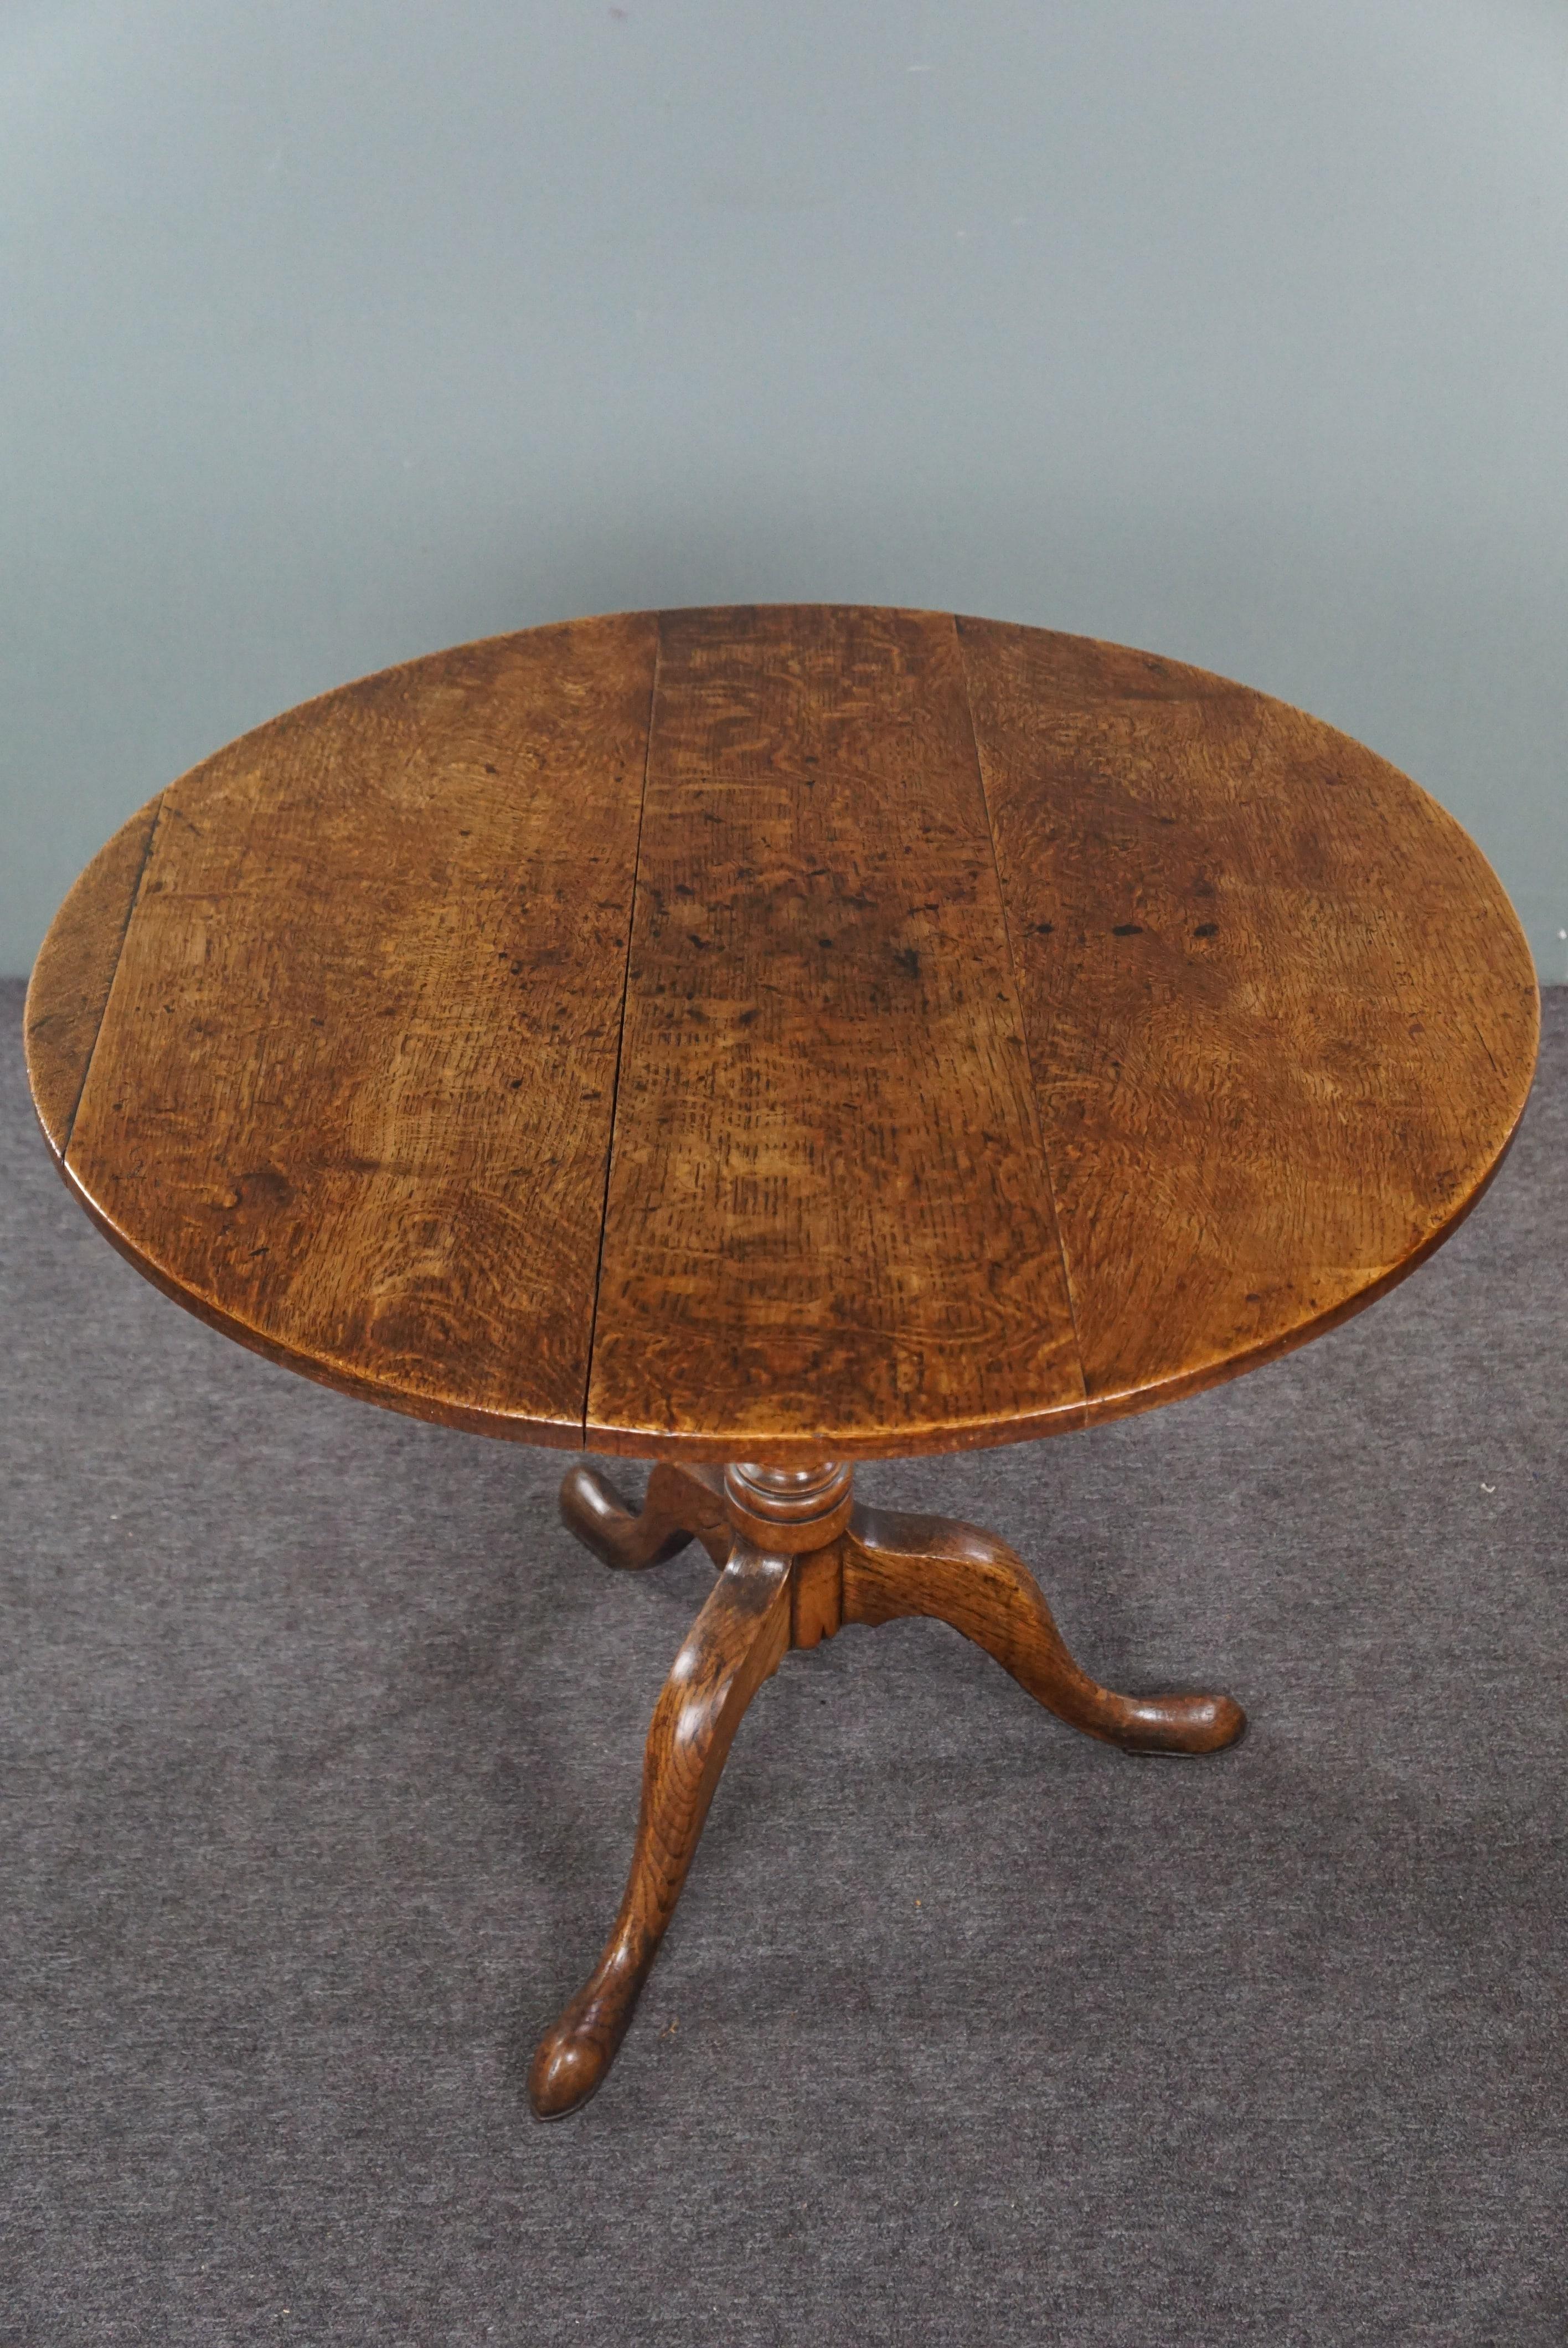 Offered is this beautiful large 18th-century English oak tilt-top table with warm colors. This magnificent large English tilt-top table is in good and proper condition. Due to its folding mechanism, it's easy to fold up and put aside should extra